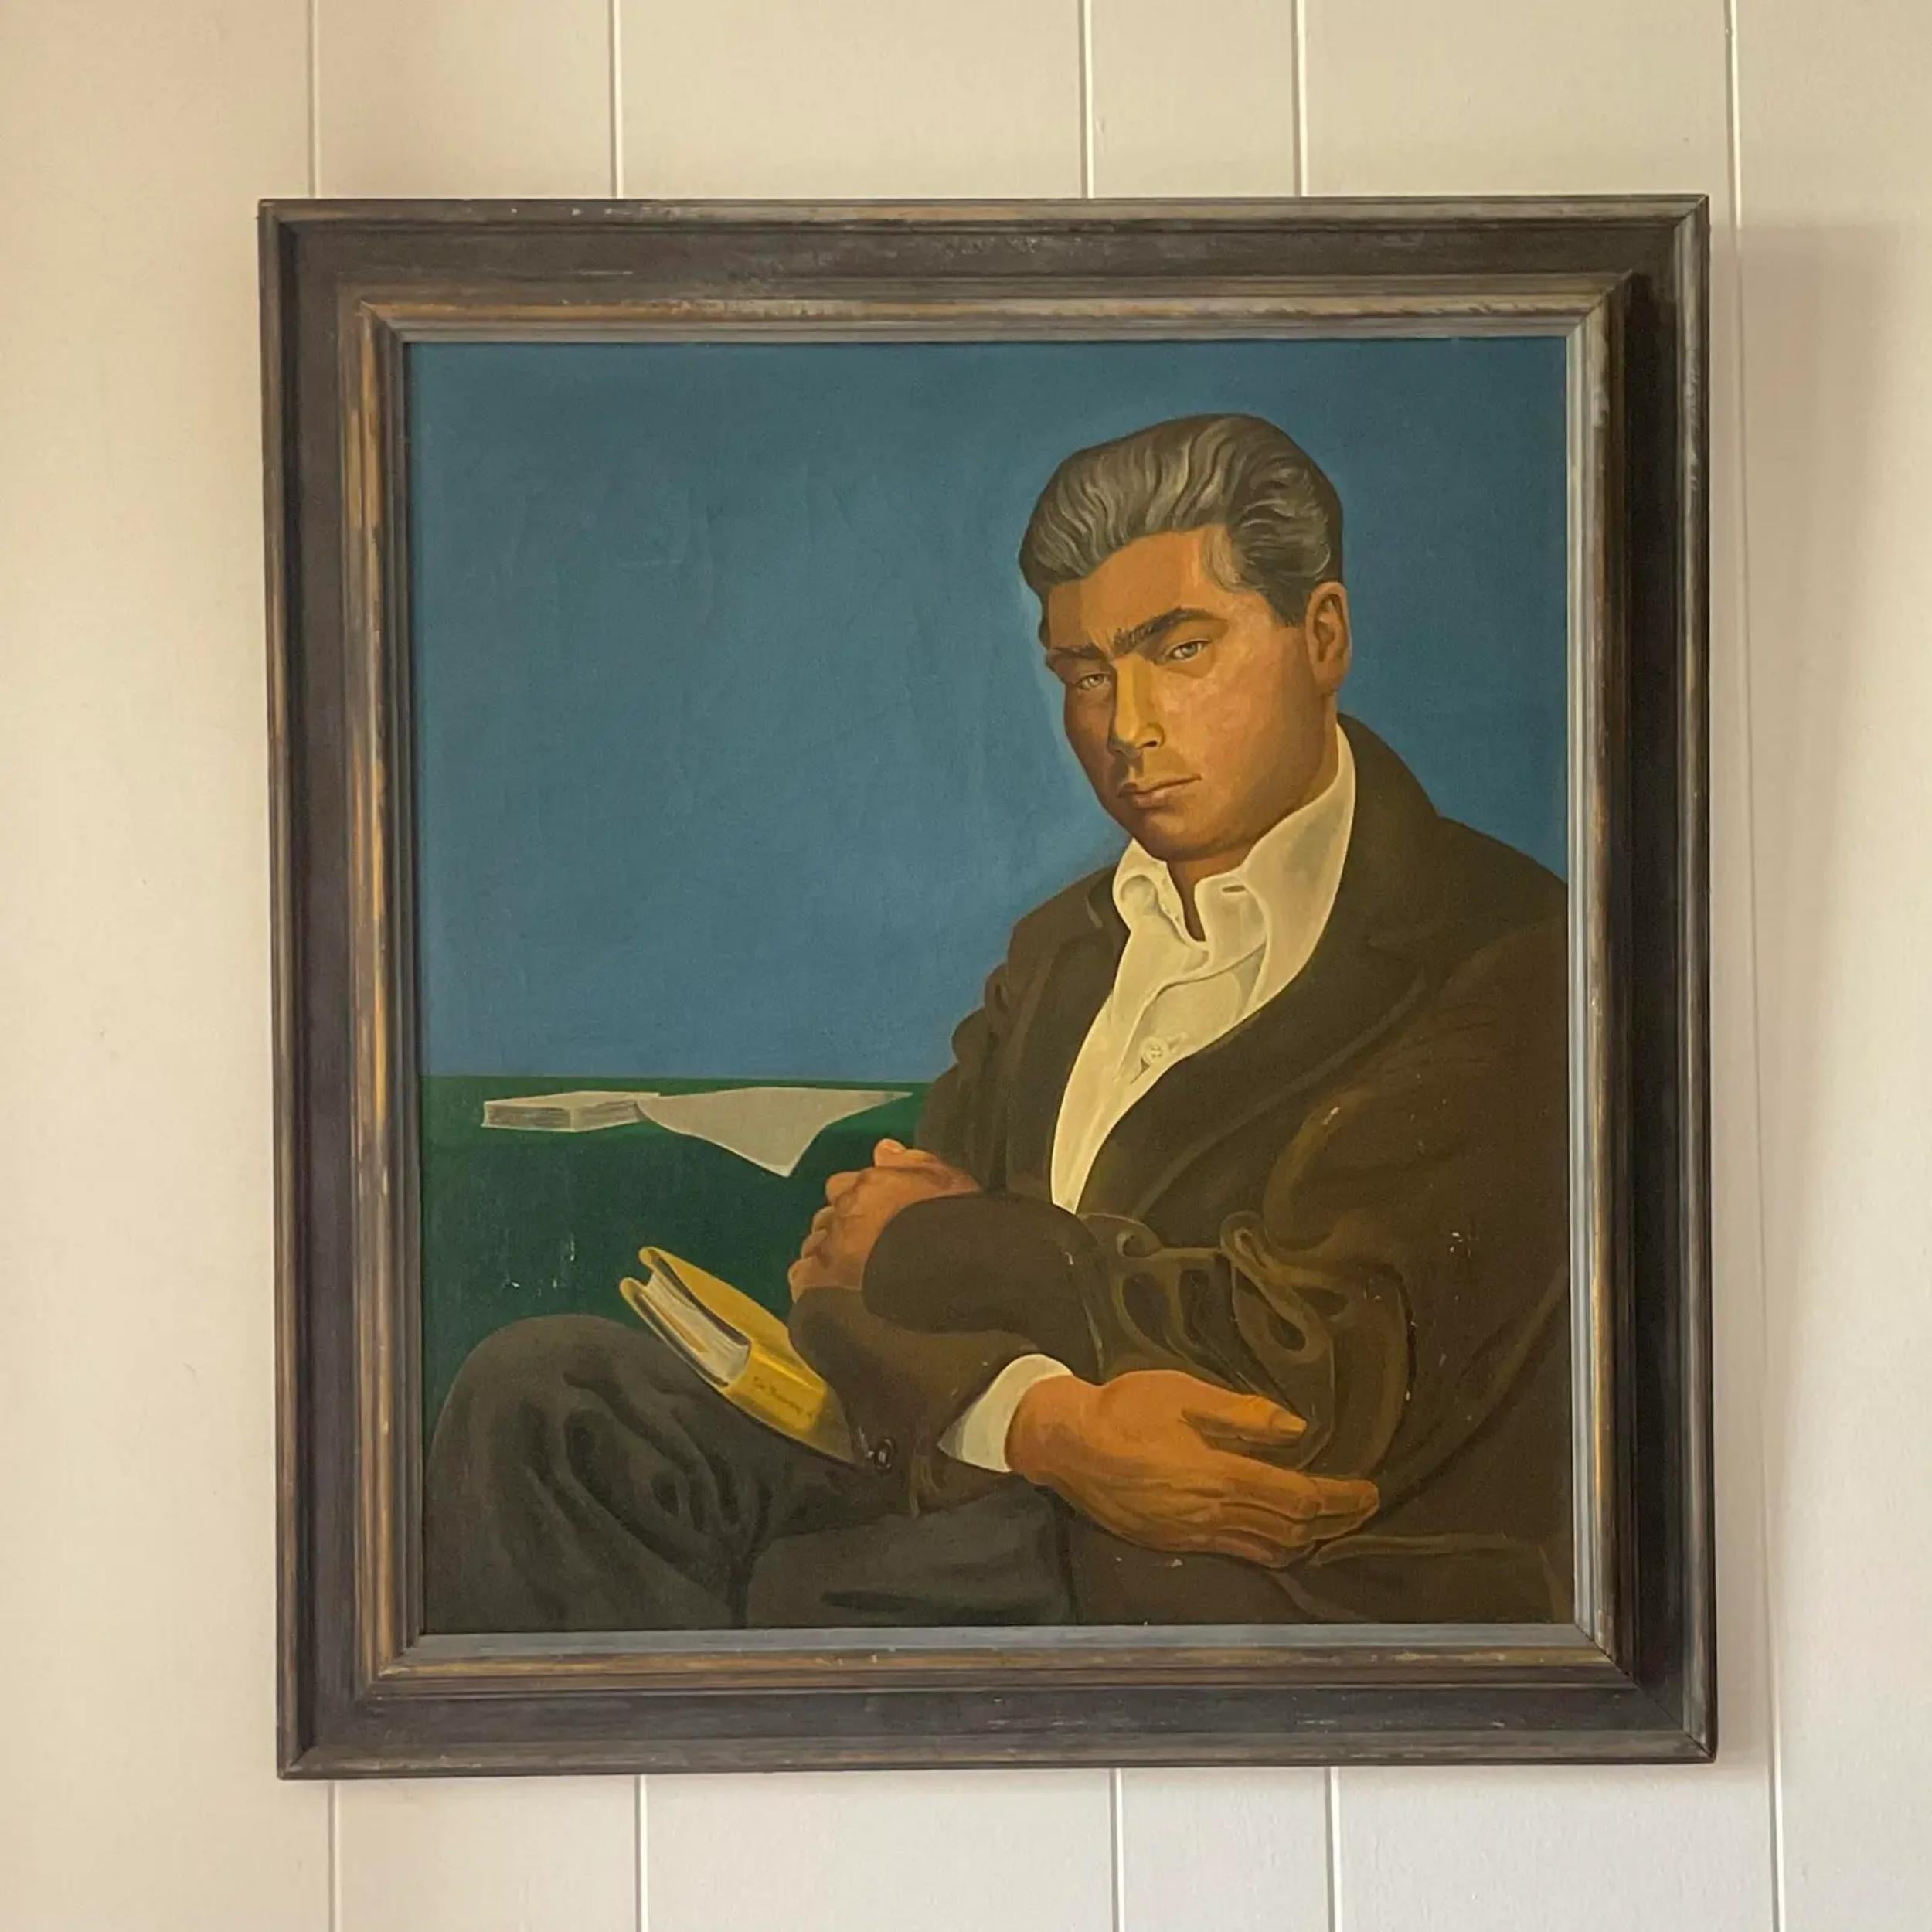 A fabulous vintage signed original oil portrait. A period composition of a man with his arms crossed. Signed by the artist. Acquired from a New Jersey estate.